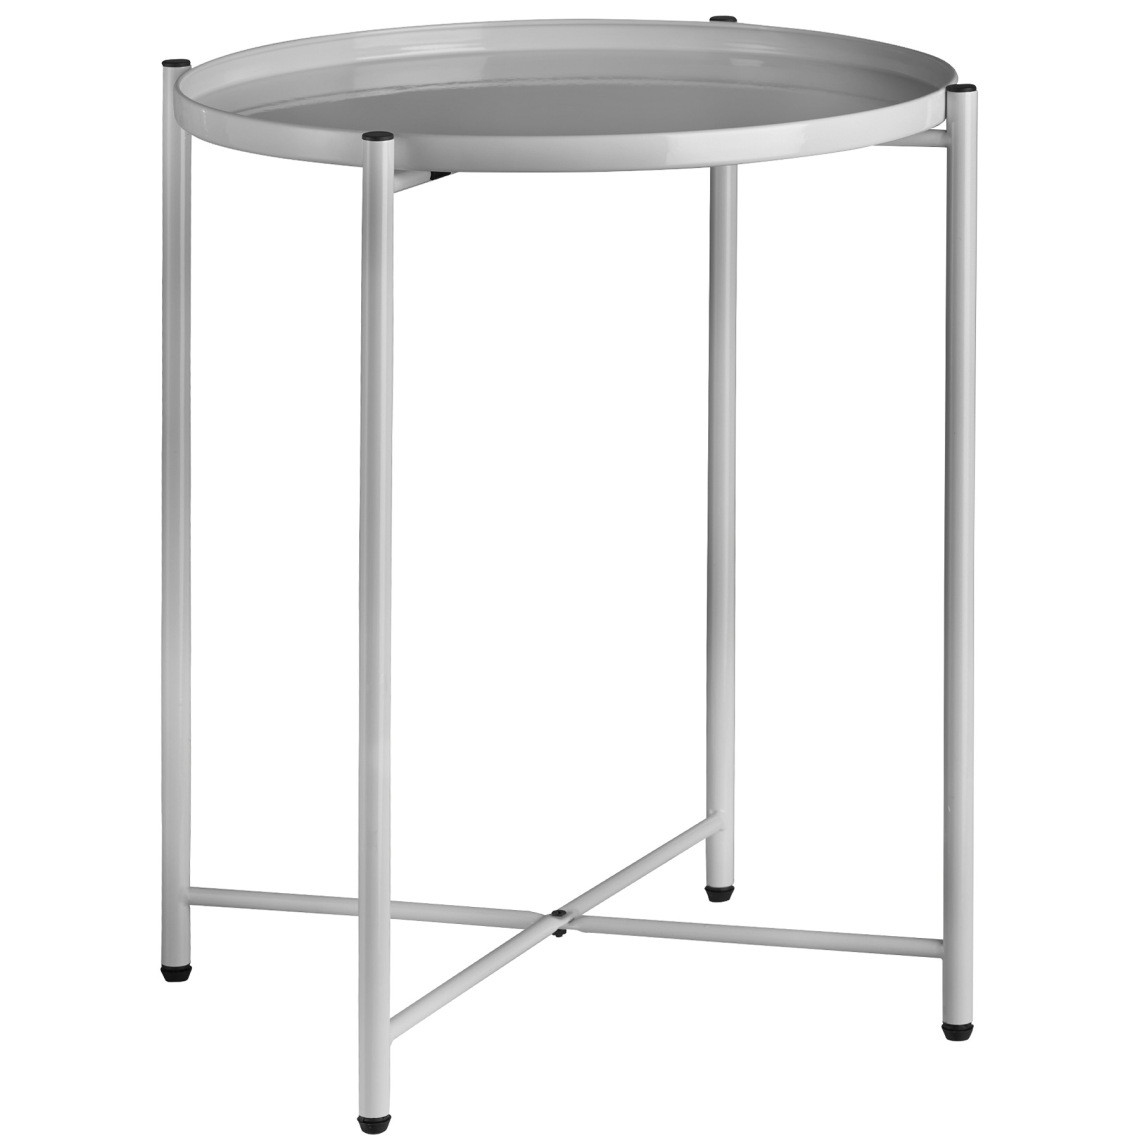 Tectake - Table d’appoint CHESTER - gris - Tables à manger